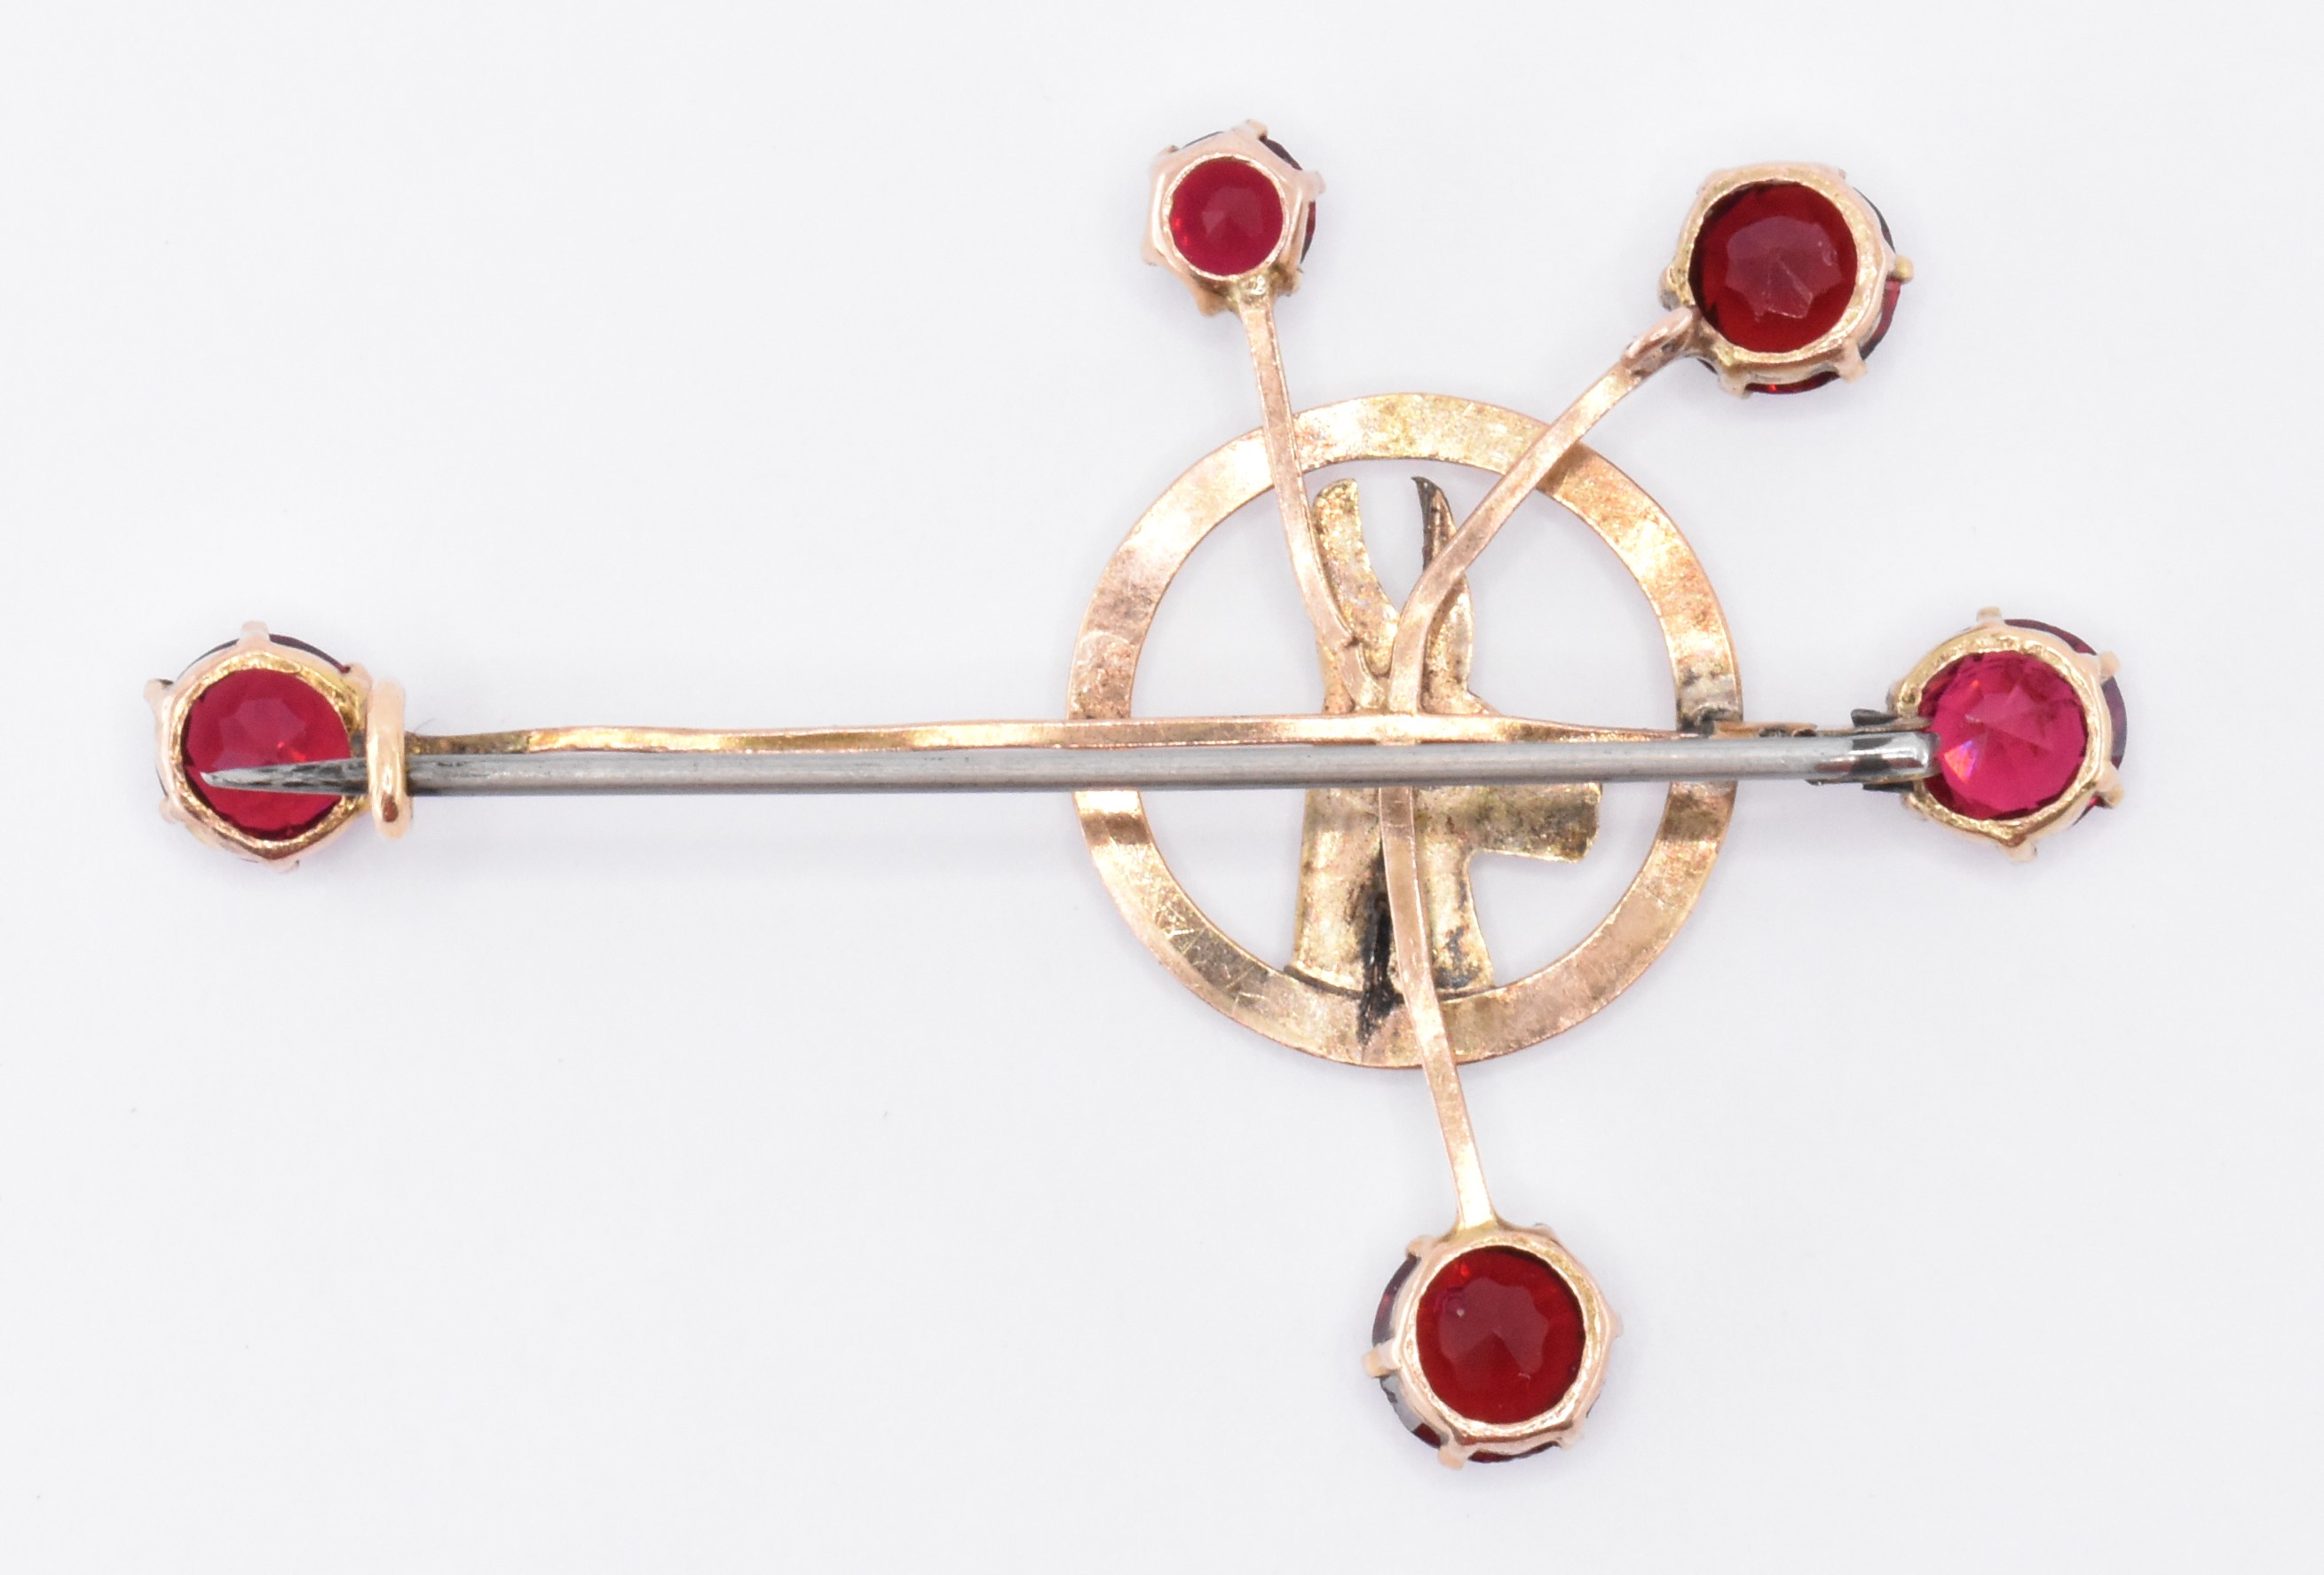 9CT GOLD & RED STONE SPRINGBOK BROOCH - Image 3 of 4